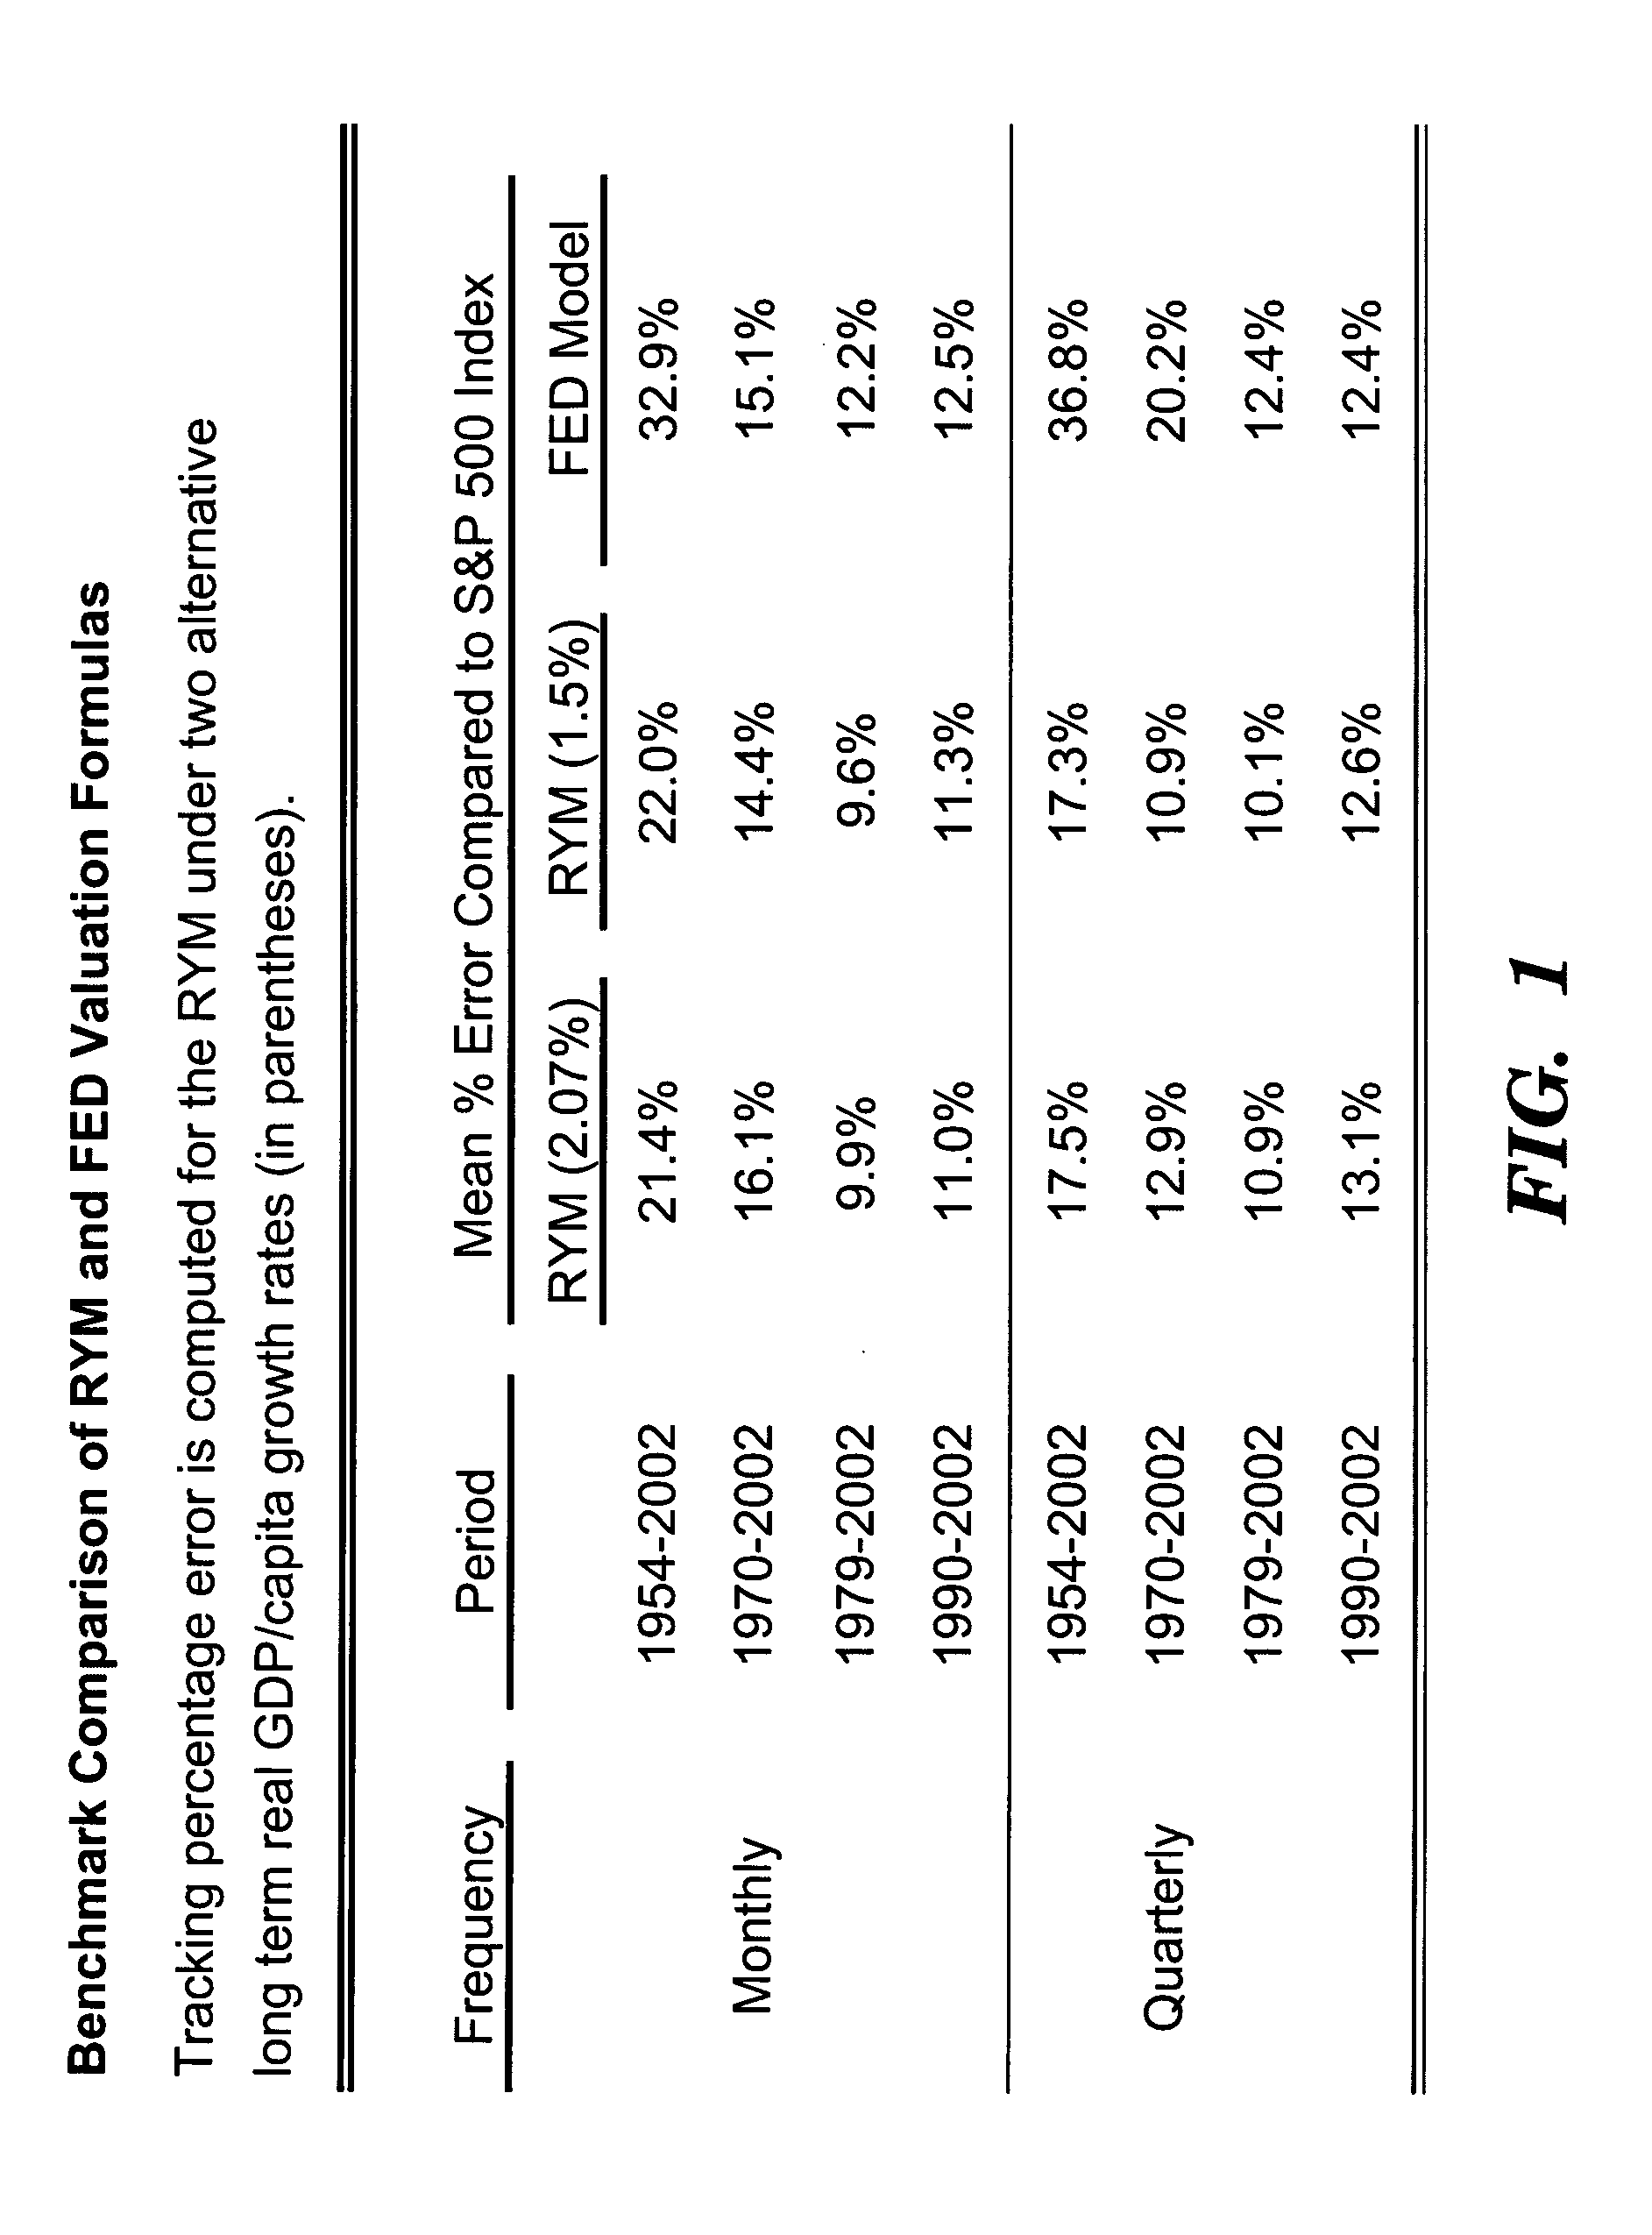 Asset analysis according to the required yield method